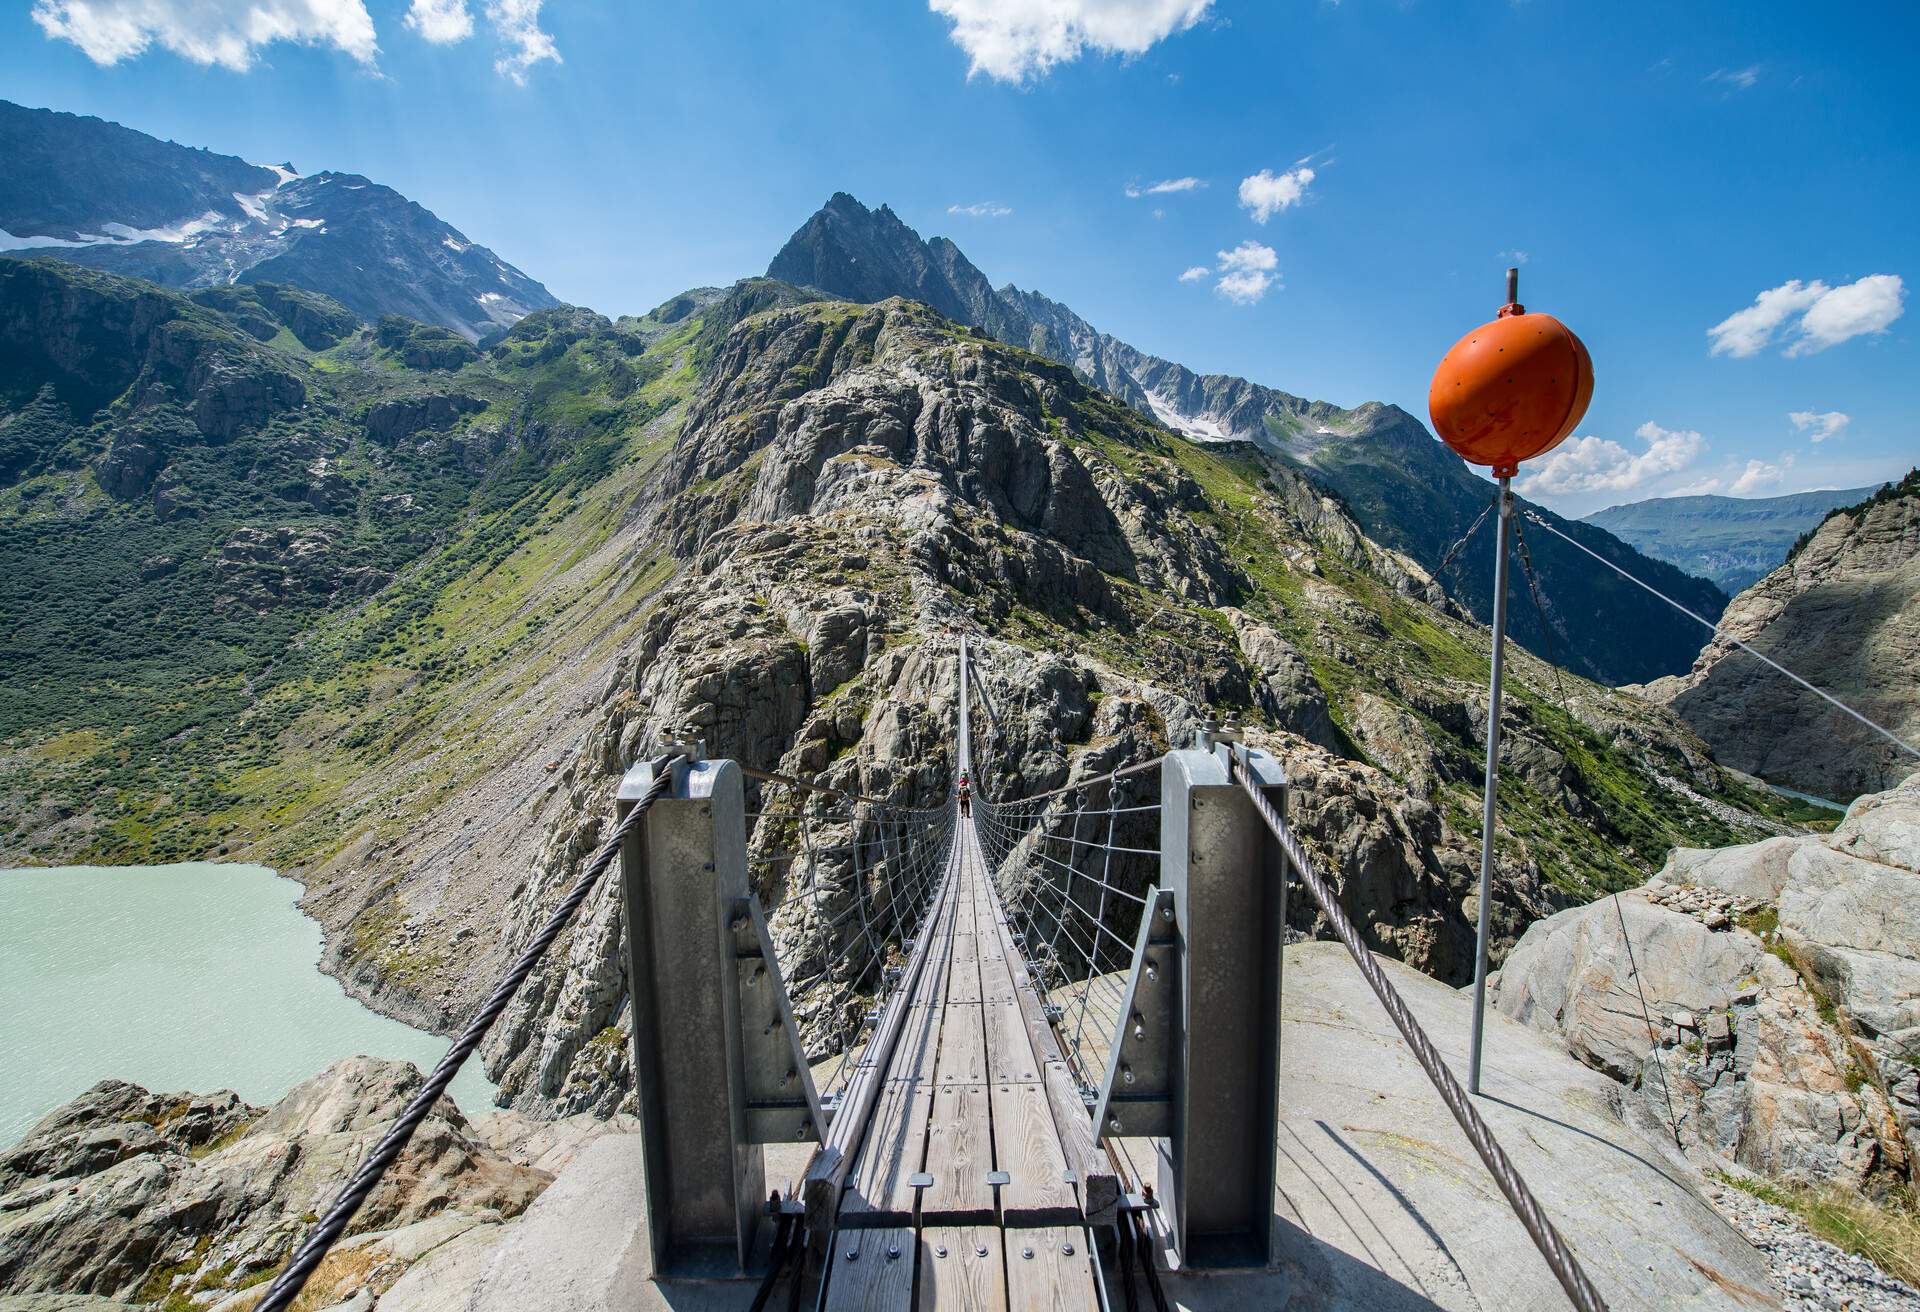 The Trift brige is probably the longest and highest suspension bridge in the alps in a rural landscapeIt is a turist attraction and can only be reached by walking. 